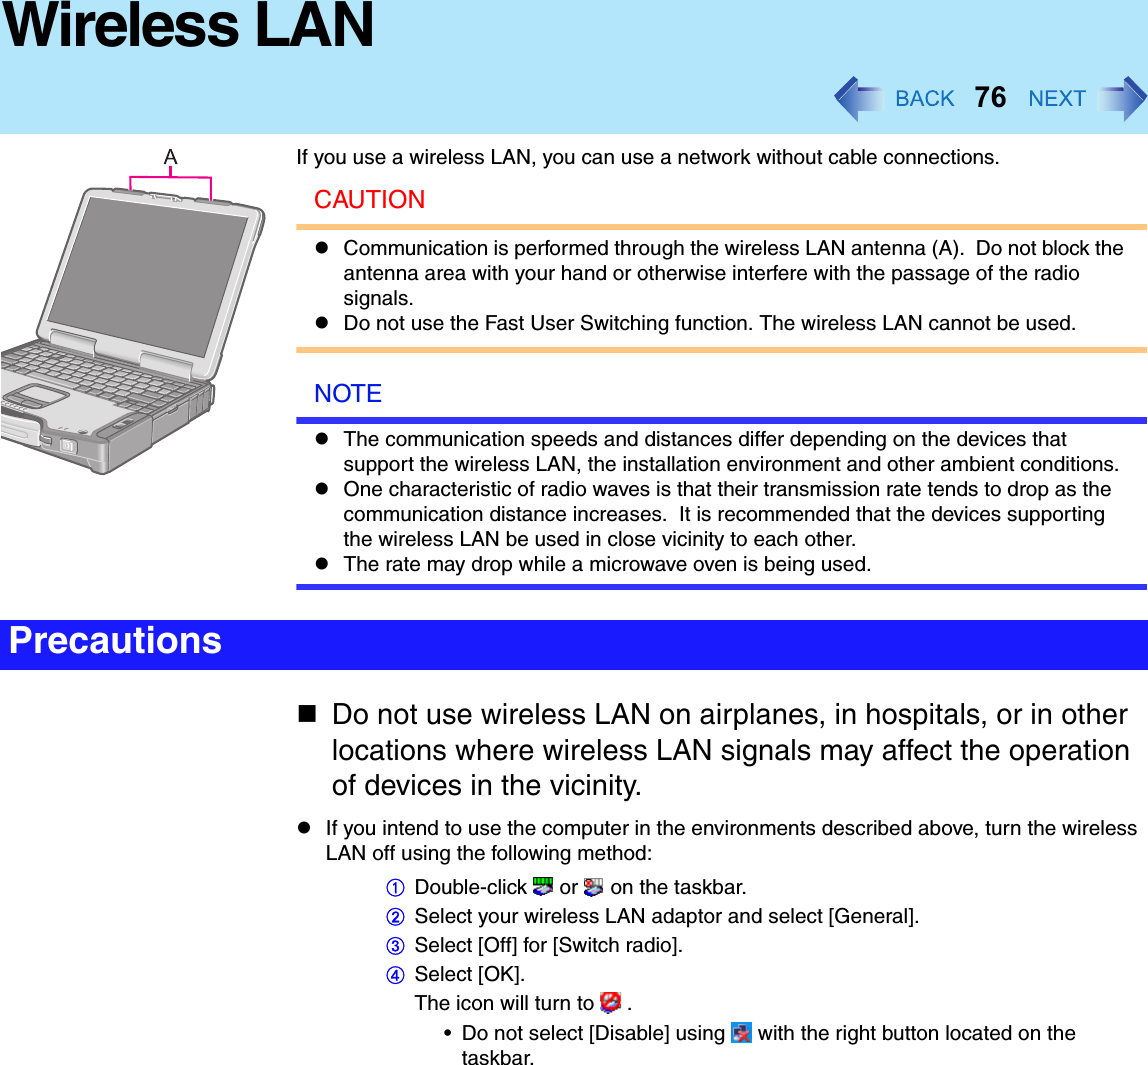 76Wireless LANIf you use a wireless LAN, you can use a network without cable connections.CAUTIONCommunication is performed through the wireless LAN antenna (A).  Do not block the antenna area with your hand or otherwise interfere with the passage of the radio signals.Do not use the Fast User Switching function. The wireless LAN cannot be used.NOTEThe communication speeds and distances differ depending on the devices that support the wireless LAN, the installation environment and other ambient conditions.One characteristic of radio waves is that their transmission rate tends to drop as the communication distance increases.  It is recommended that the devices supporting the wireless LAN be used in close vicinity to each other.The rate may drop while a microwave oven is being used.Do not use wireless LAN on airplanes, in hospitals, or in other locations where wireless LAN signals may affect the operation of devices in the vicinity.If you intend to use the computer in the environments described above, turn the wireless LAN off using the following method:ADouble-click  or  on the taskbar.BSelect your wireless LAN adaptor and select [General].CSelect [Off] for [Switch radio].DSelect [OK].The icon will turn to   .• Do not select [Disable] using   with the right button located on the taskbar.Precautions